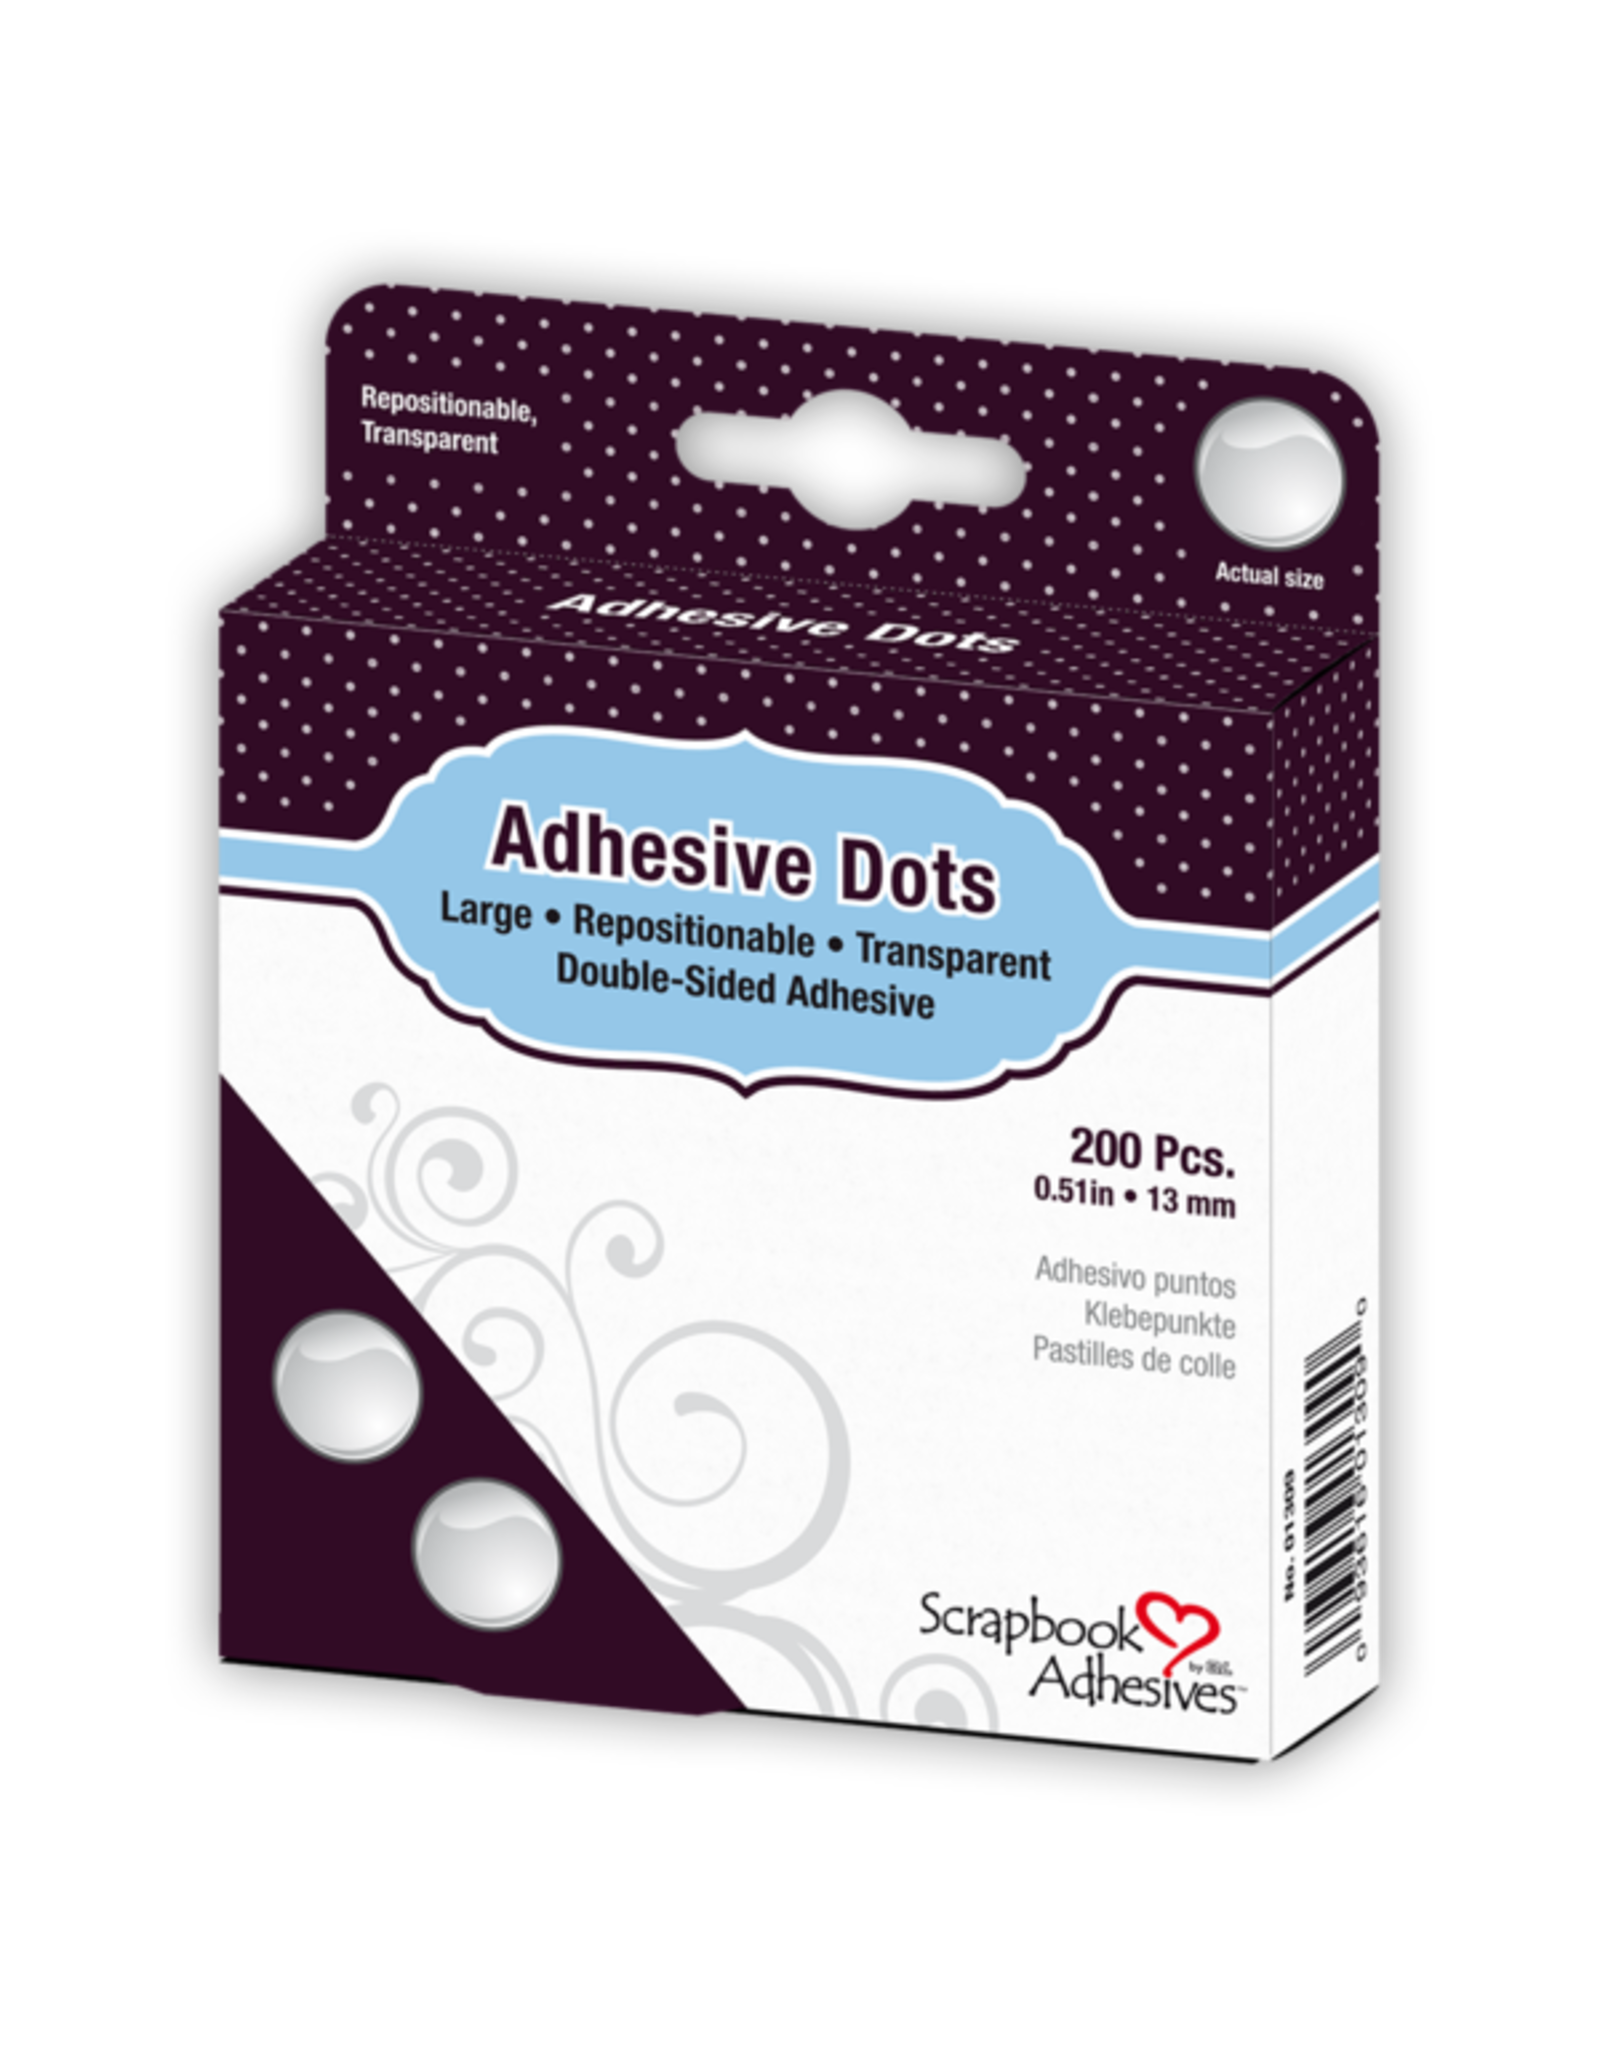 Scrapbook Adhesives Adhesive Dots - Large - Repositionable - Transparent 0.5in 13mm